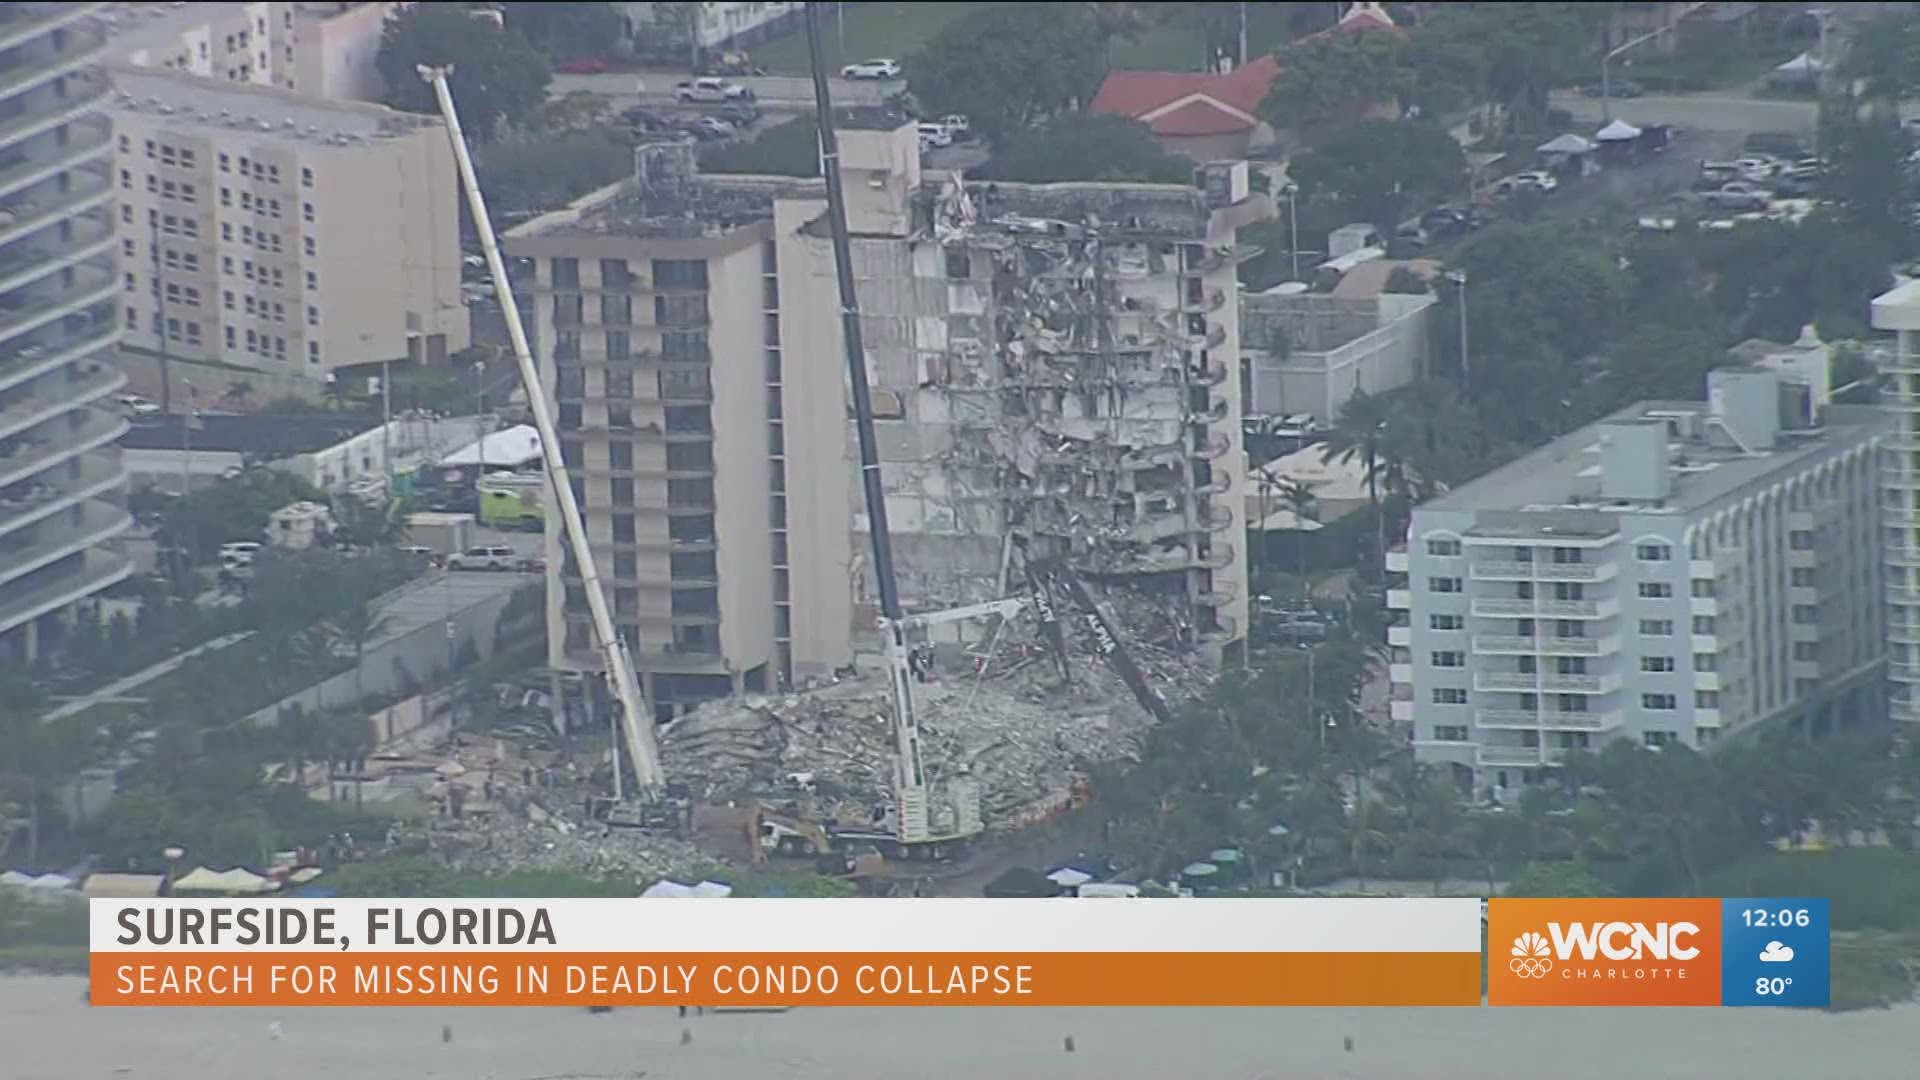 Search and rescue teams in Surfside, Florida, continue to work around the clock as they continue to look for survivors in the Miami condo collapse.